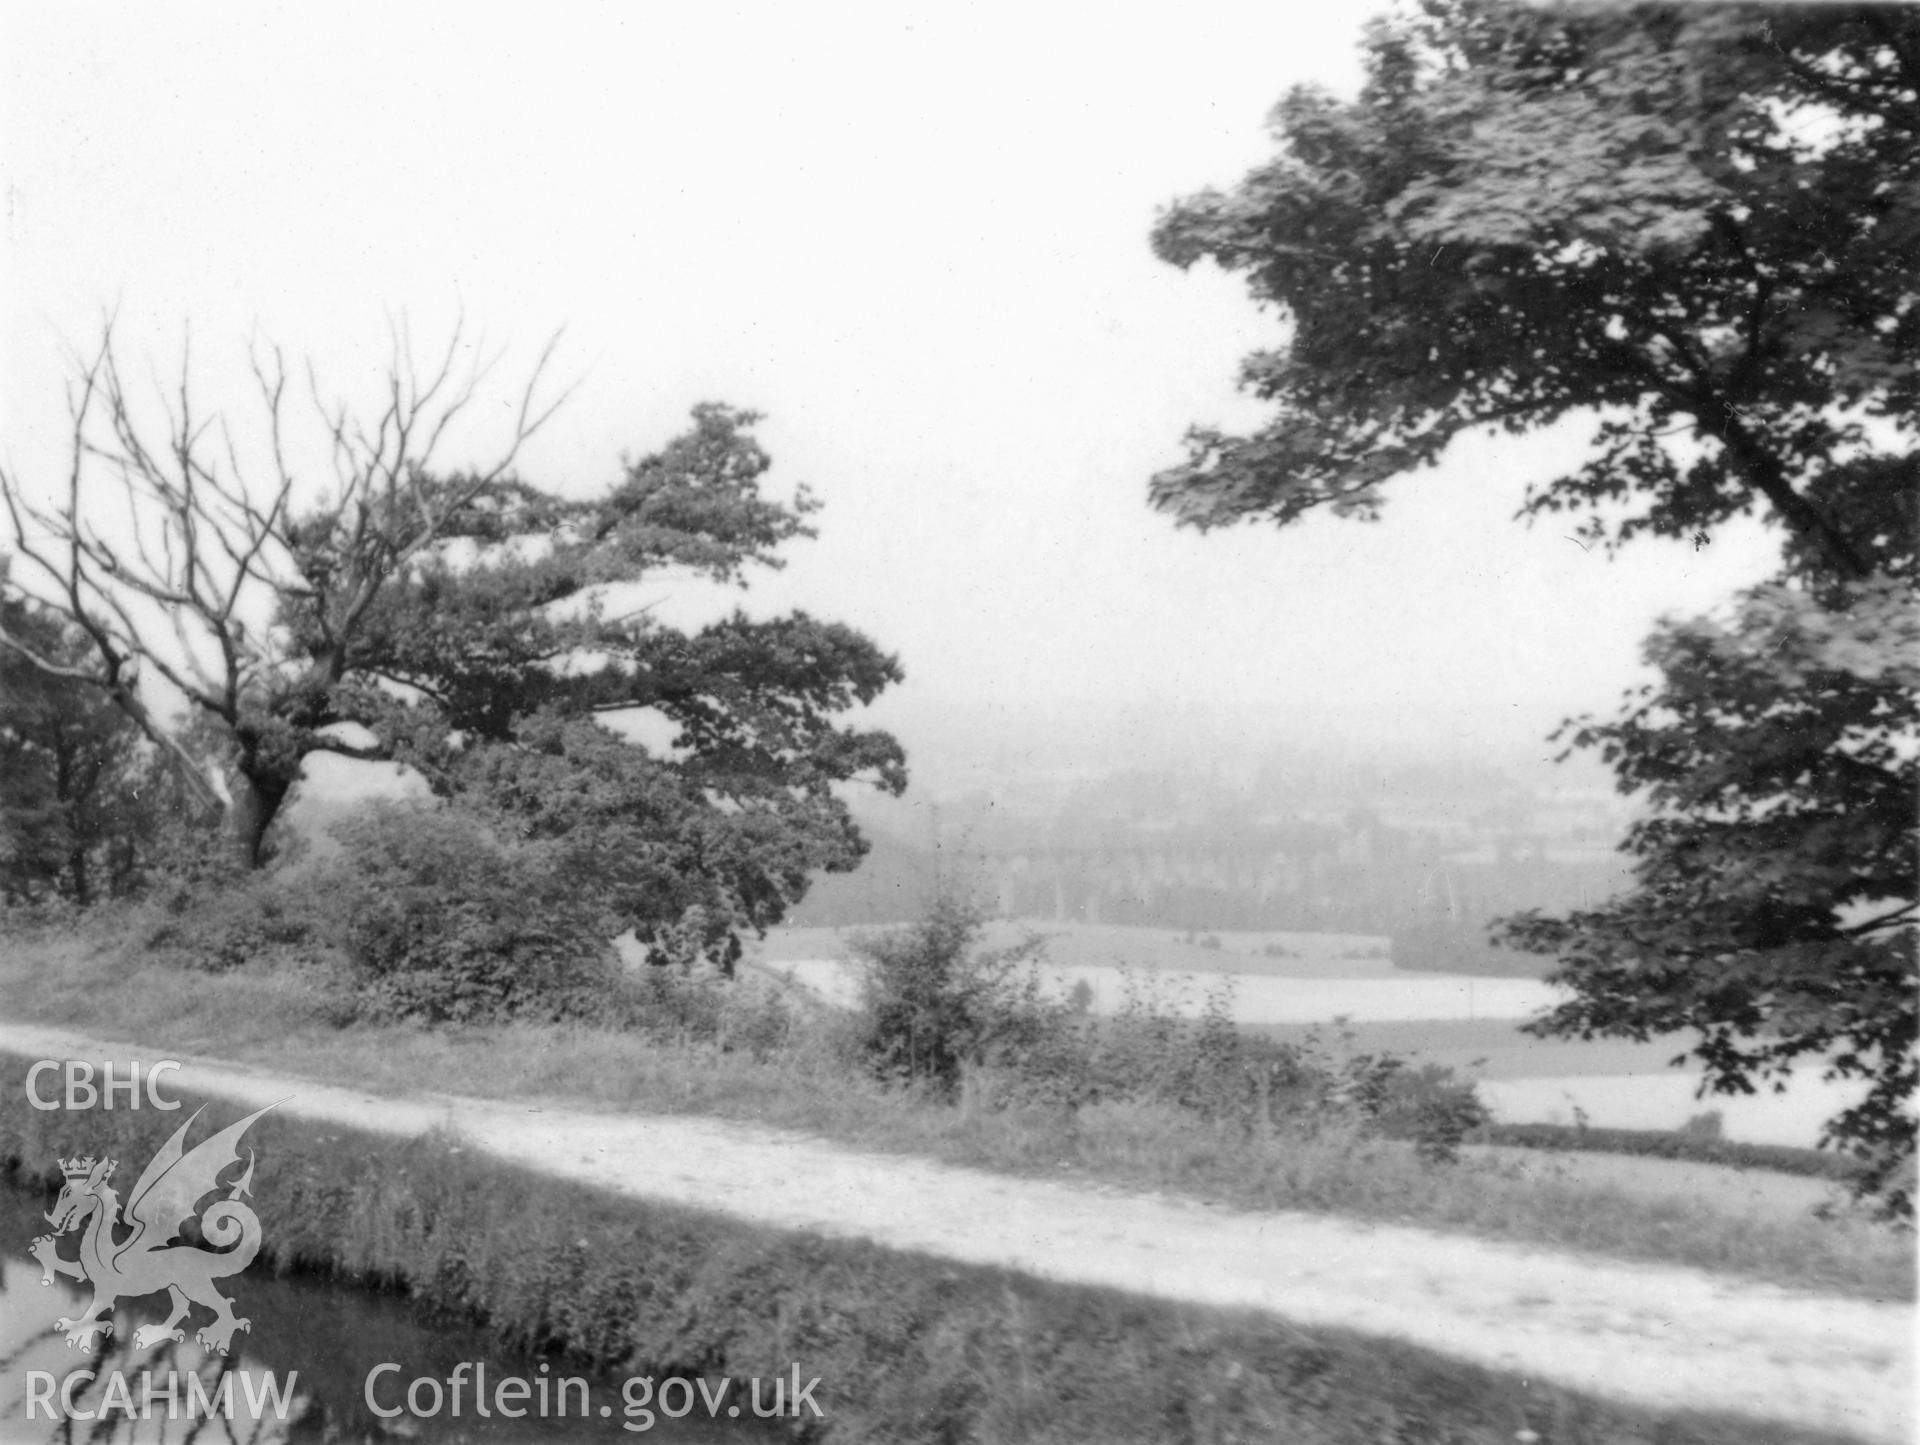 Llangollen Canal; digitized copy of a circa 1940 black and white photograph taken from a photo album loaned for copying by Anne Eastham.